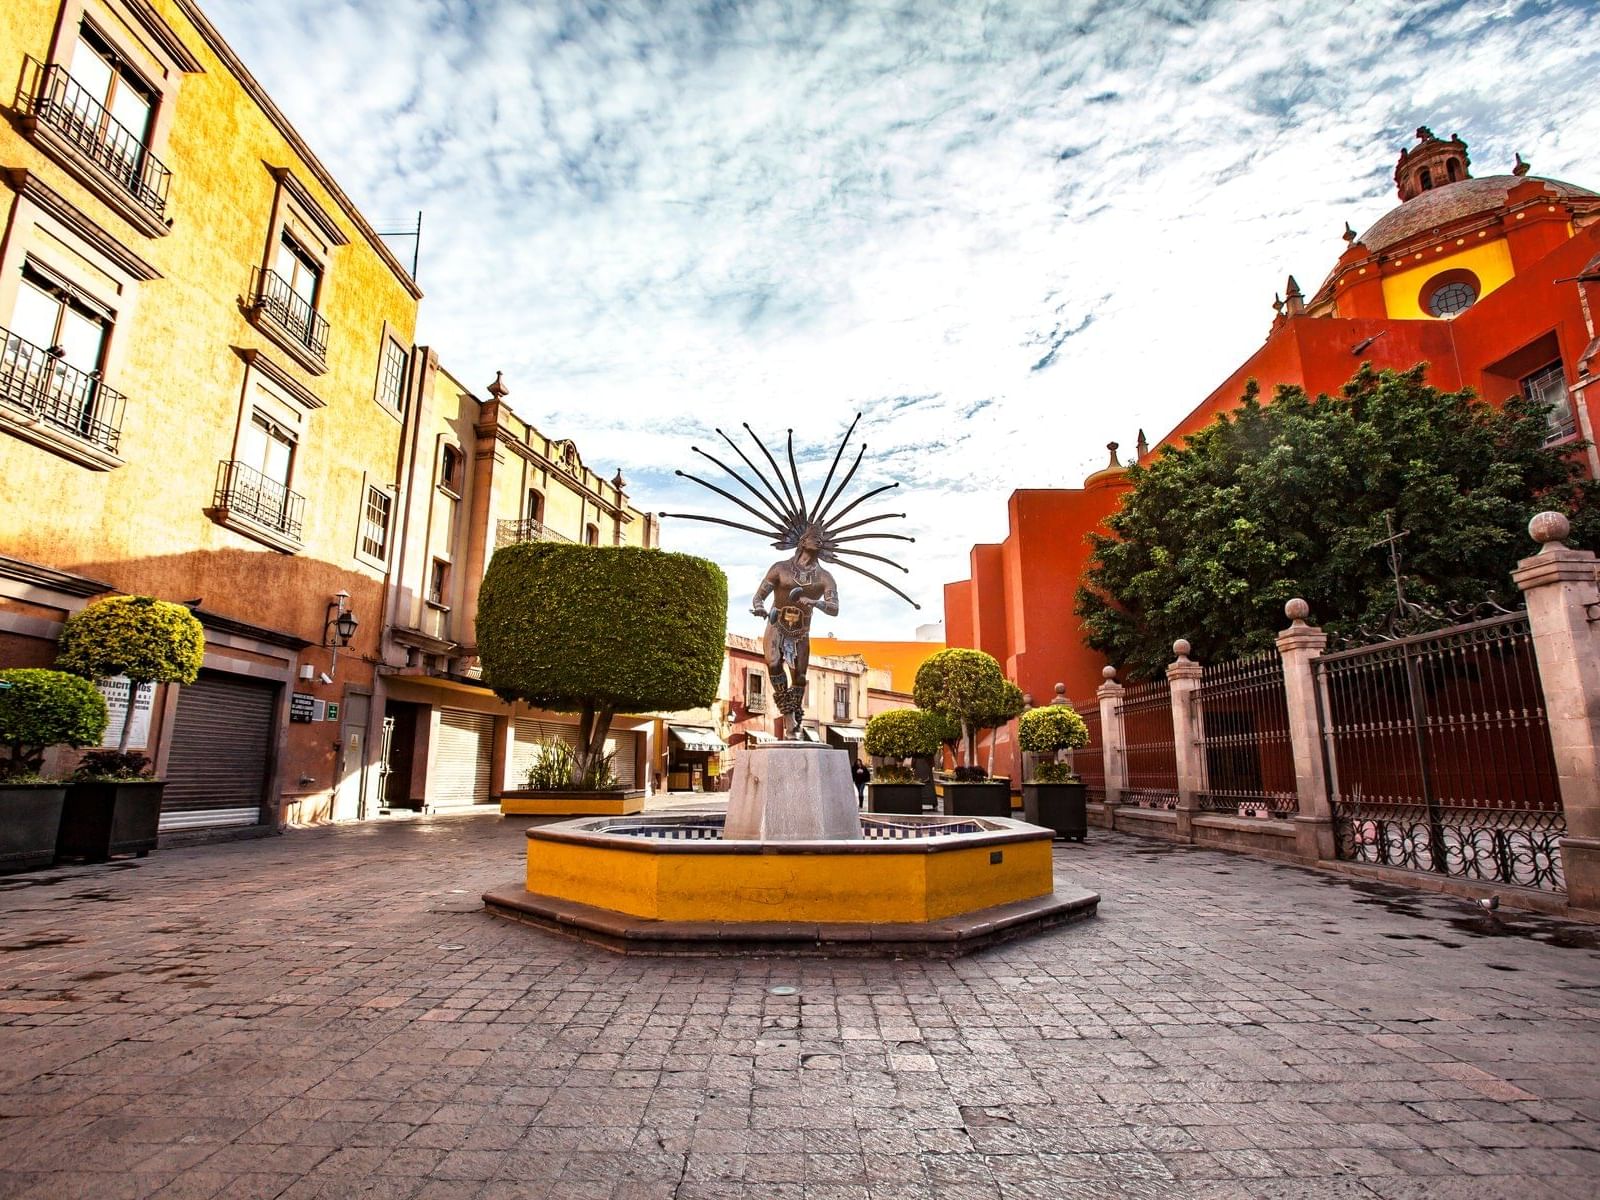 A statue in the middle of a road in the Querétaro city